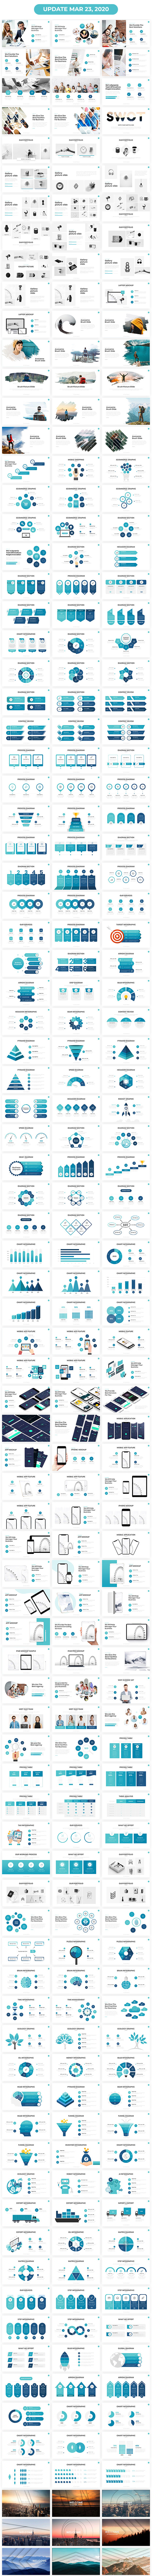 Simple & Modern Business Powerpoint Template - 3